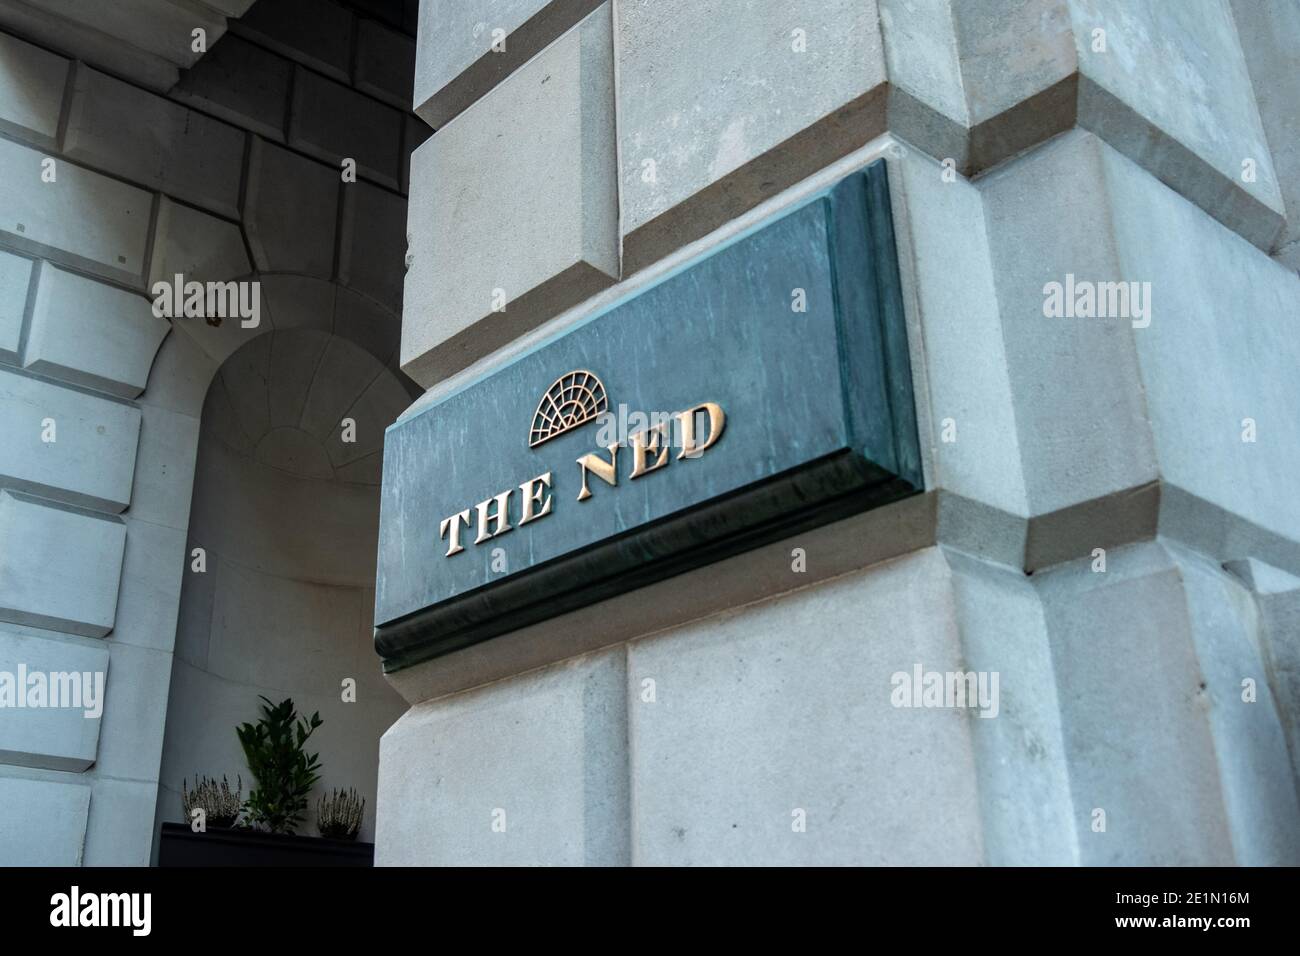 LONDON-The Ned, signage of the 5 star hotel and private members club in the City of London Stock Photo